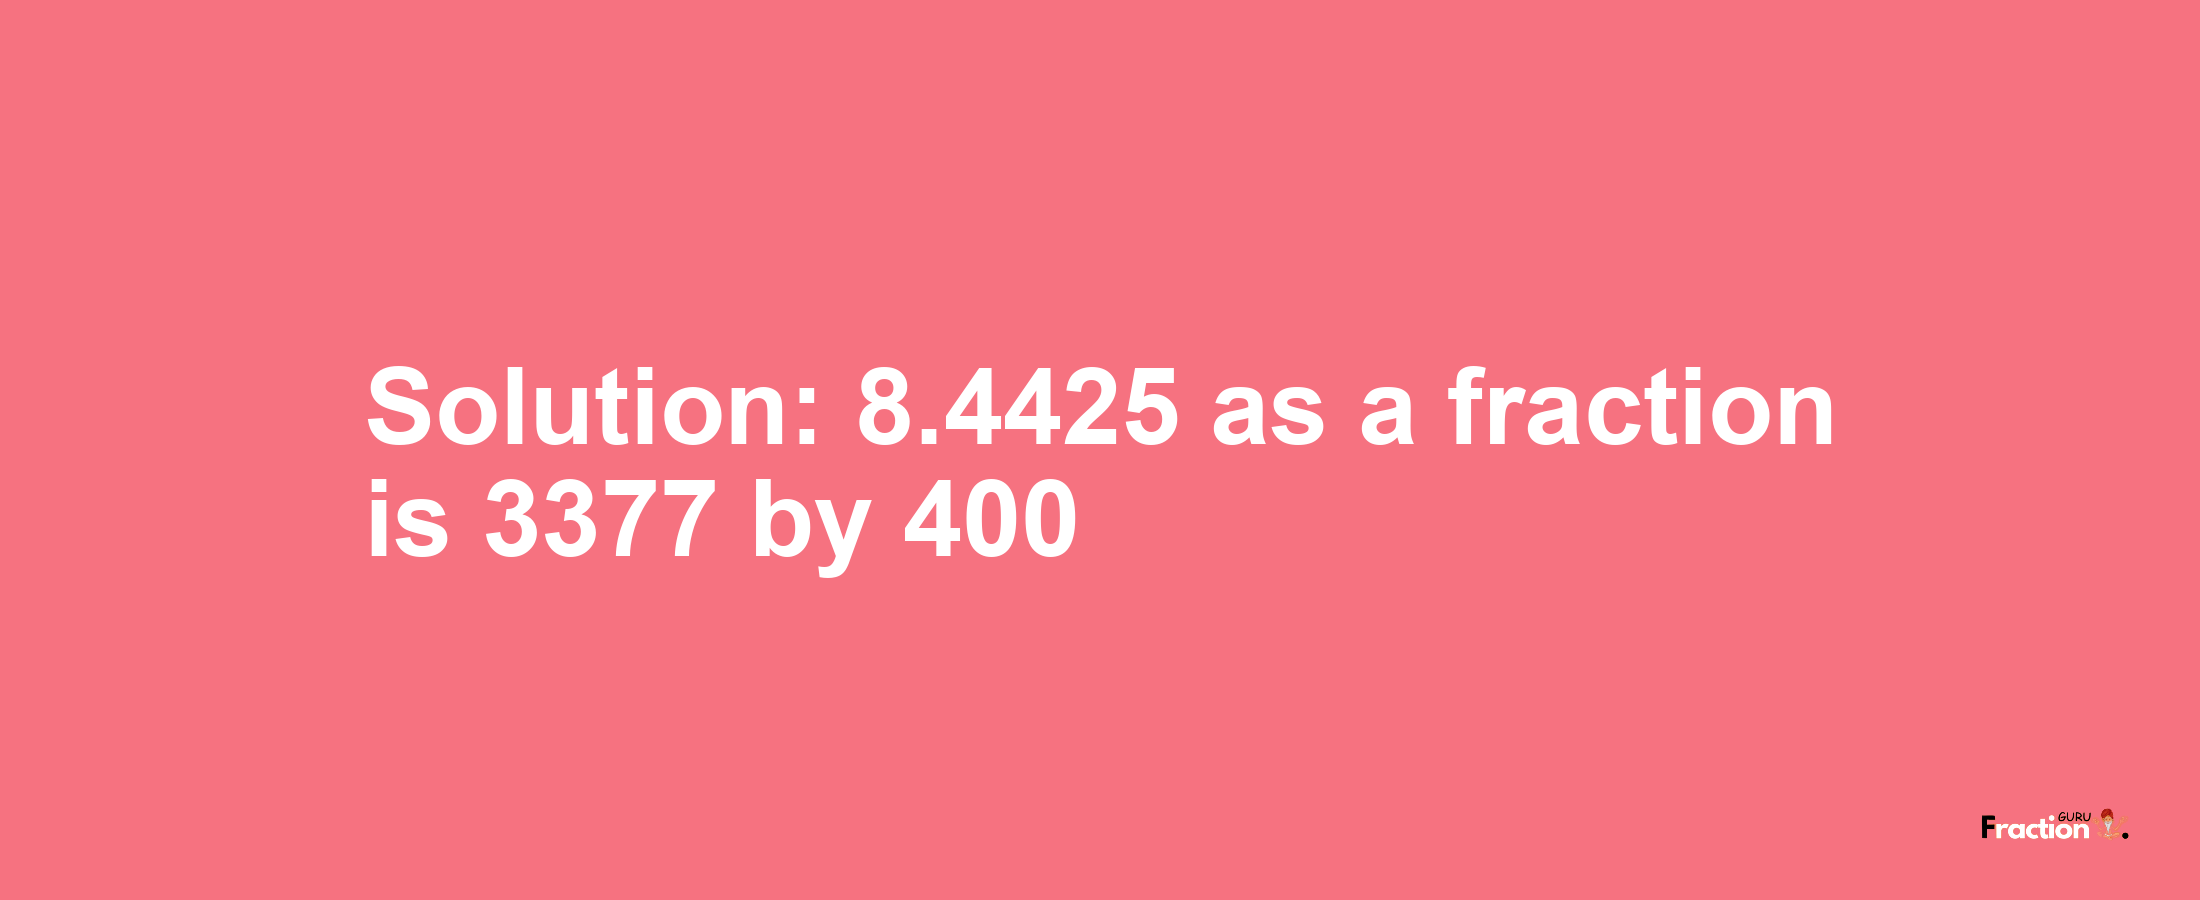 Solution:8.4425 as a fraction is 3377/400